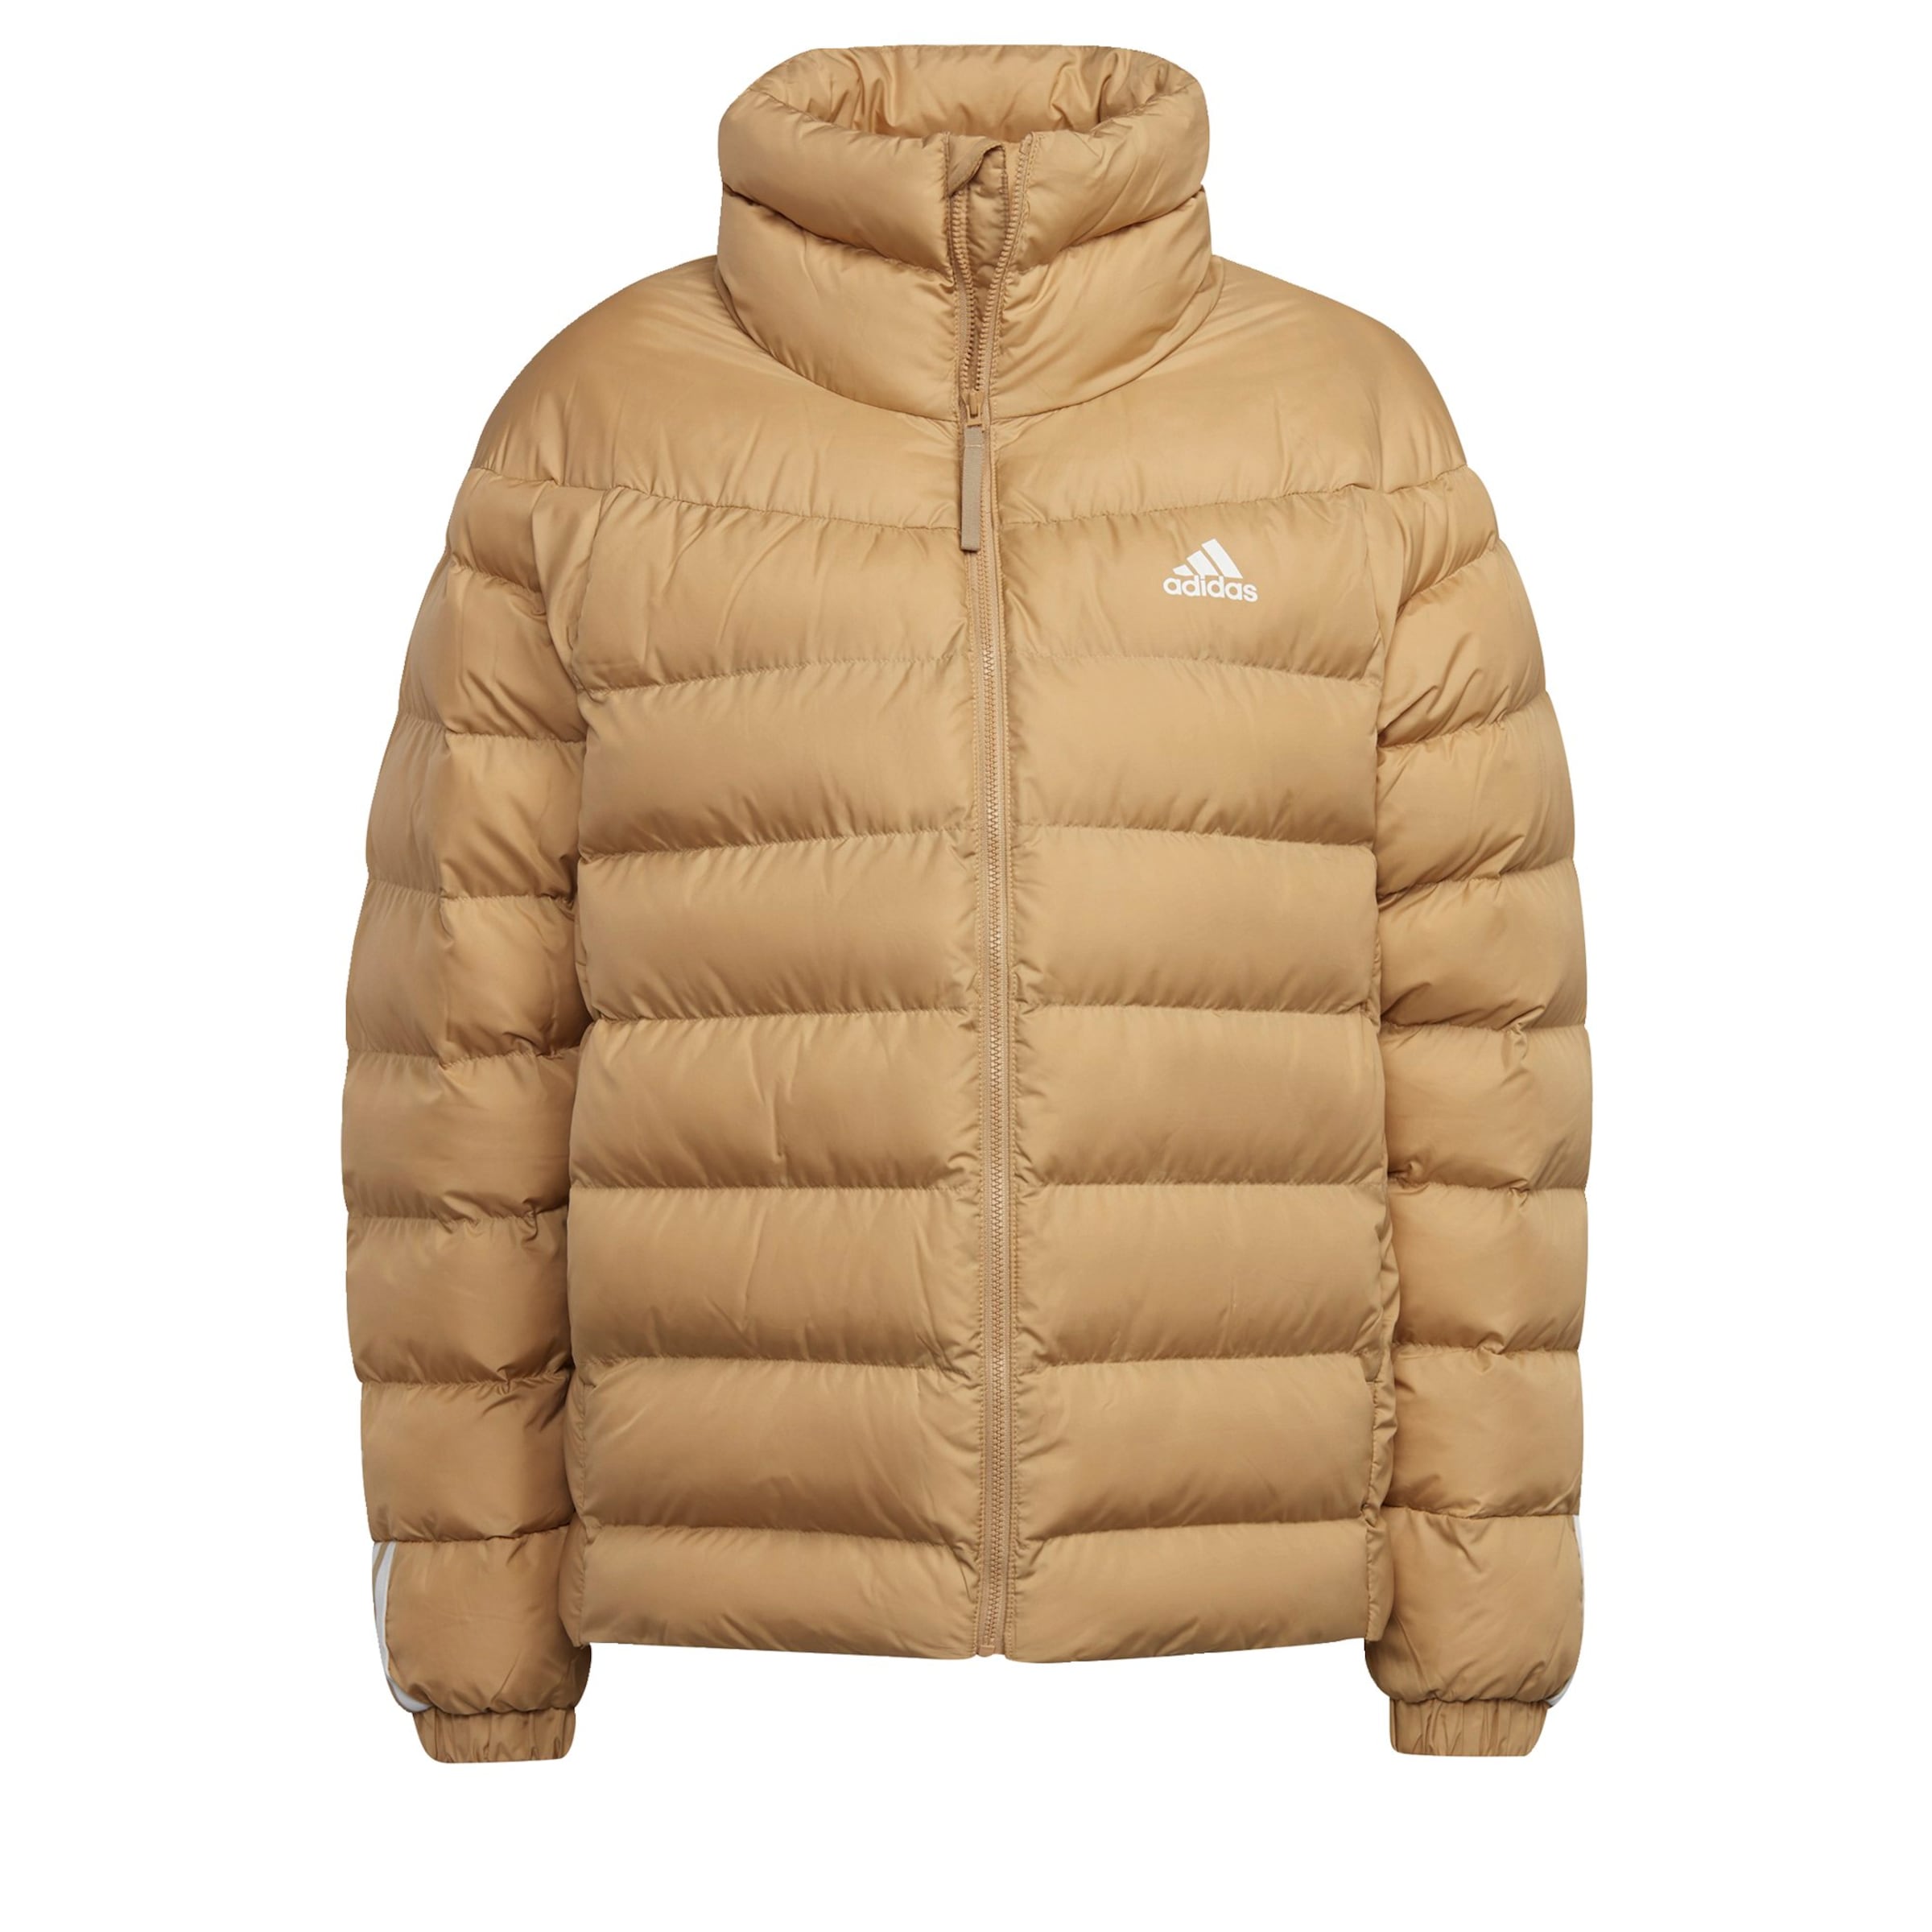 PVFlj Tipi di sport ADIDAS PERFORMANCE Giacca per outdoor Itavic in Beige 